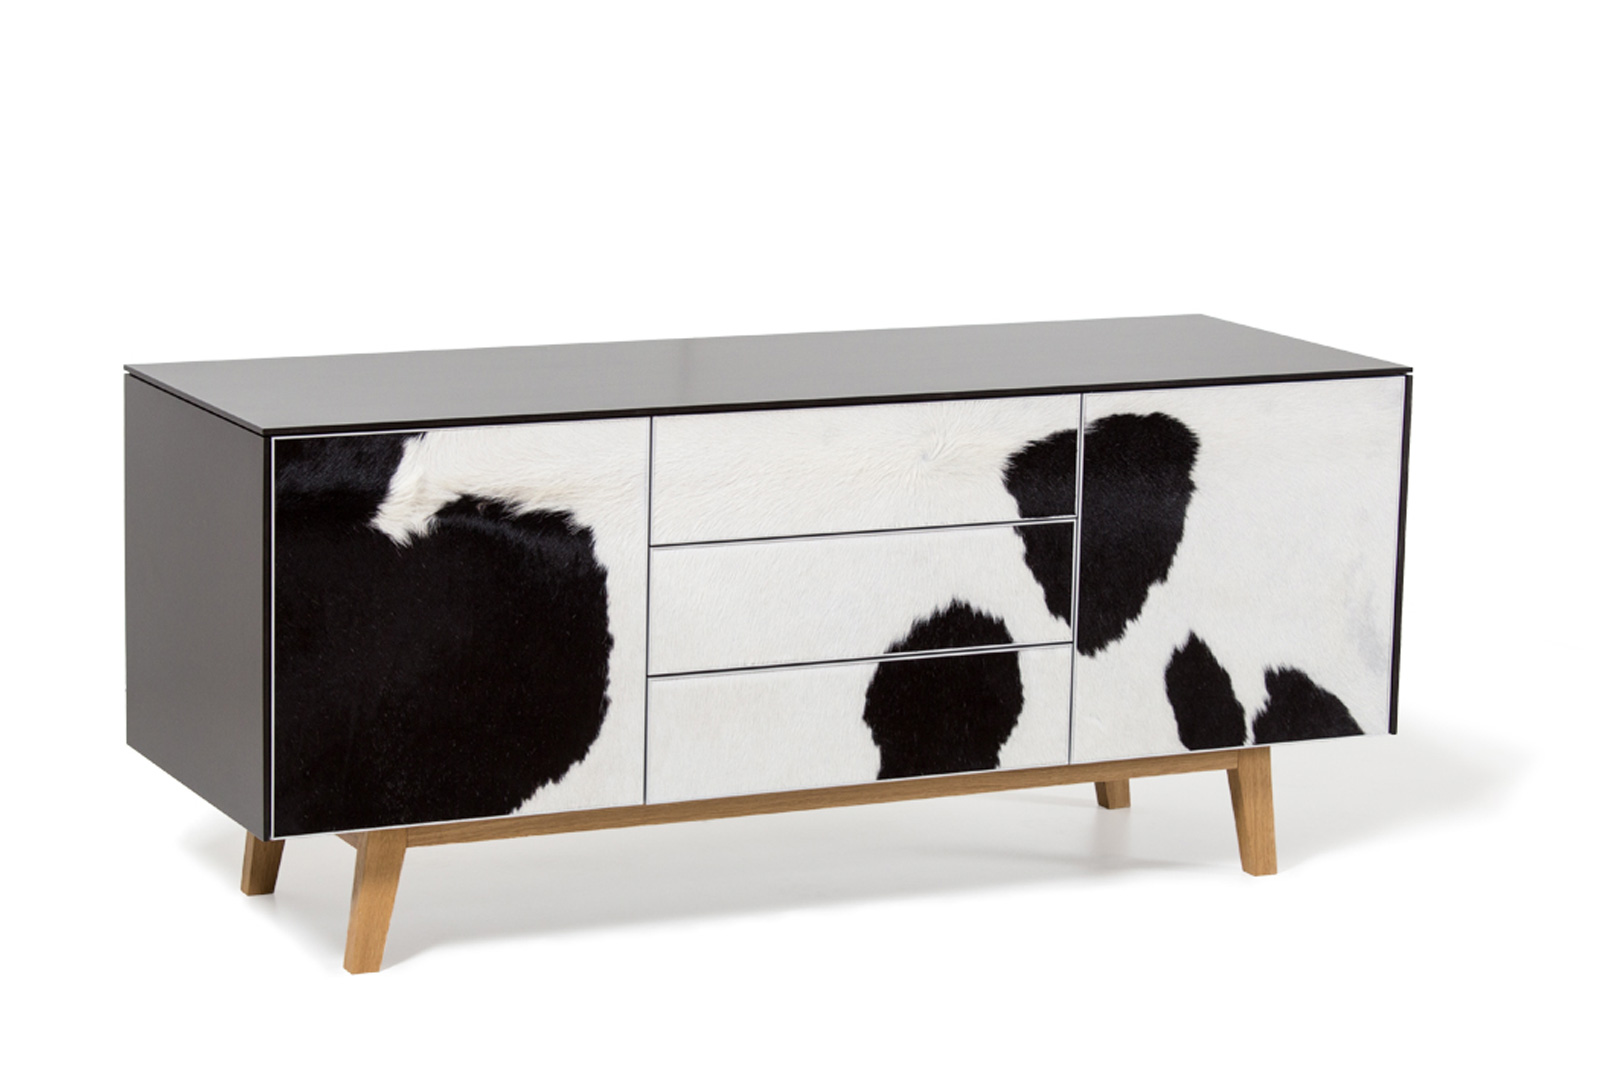 Sideboard with cow fur from the Swiss joinery Weiss Design, Zug